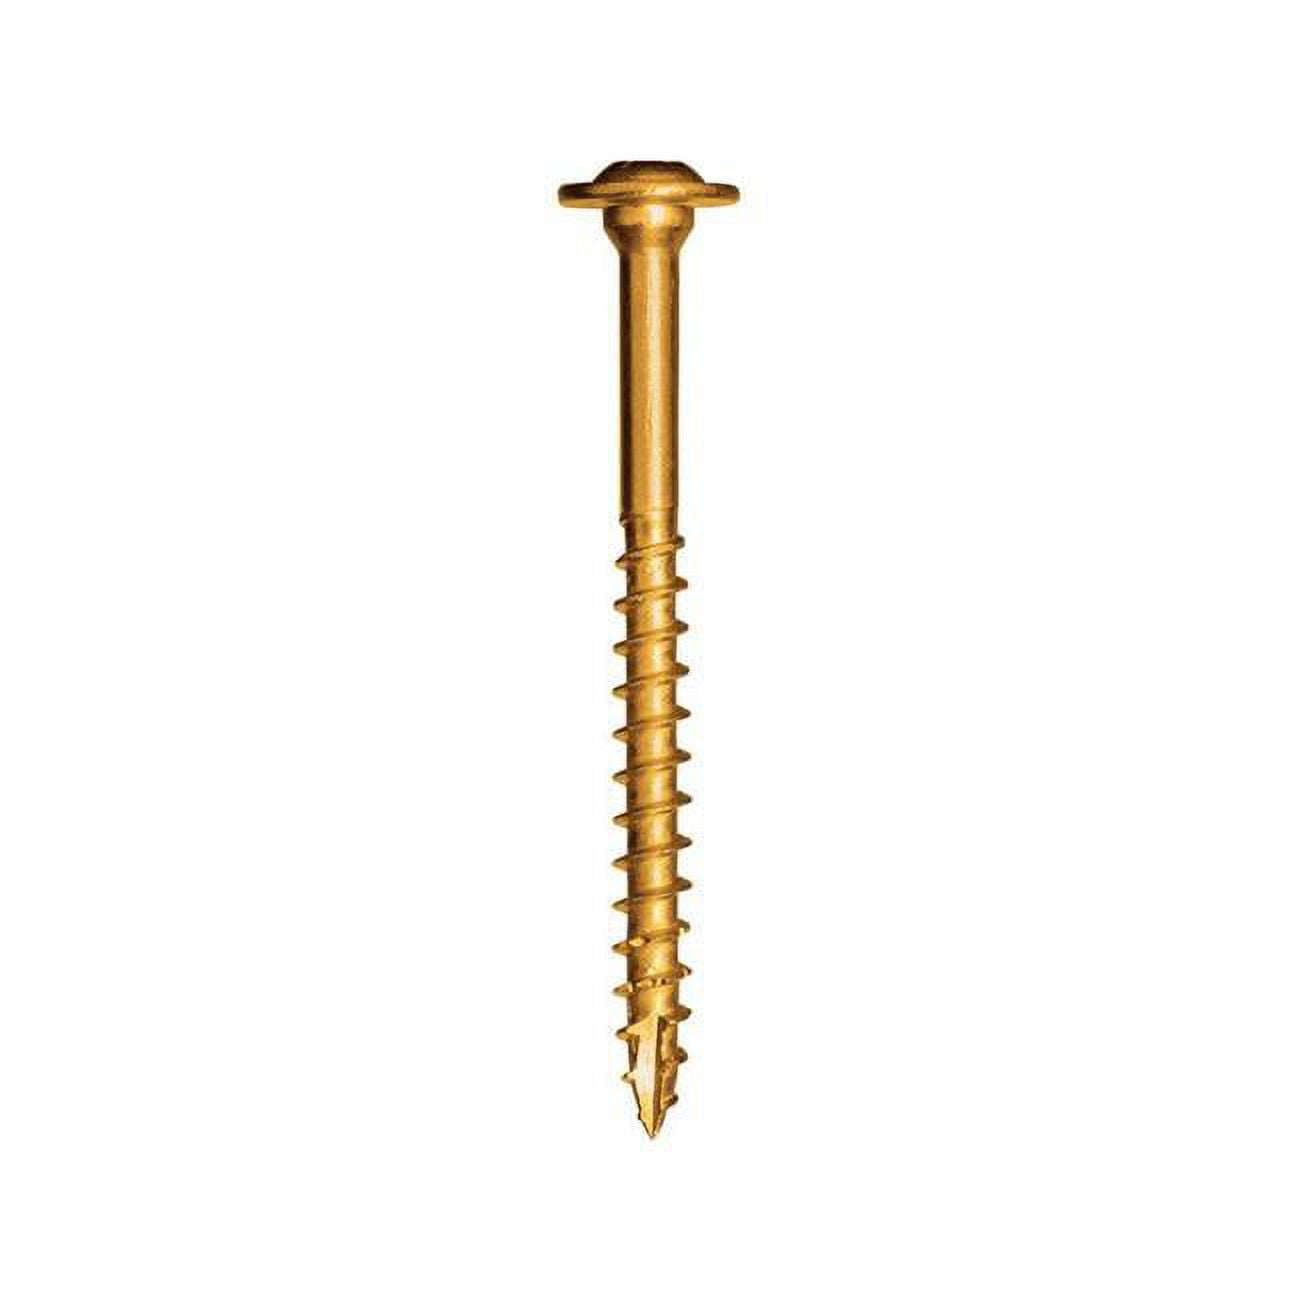 Picture of GRK Fasteners 5913397 0.31 x 2.5 in. Star Self Tapping Zinc Construction Screws, Yellow